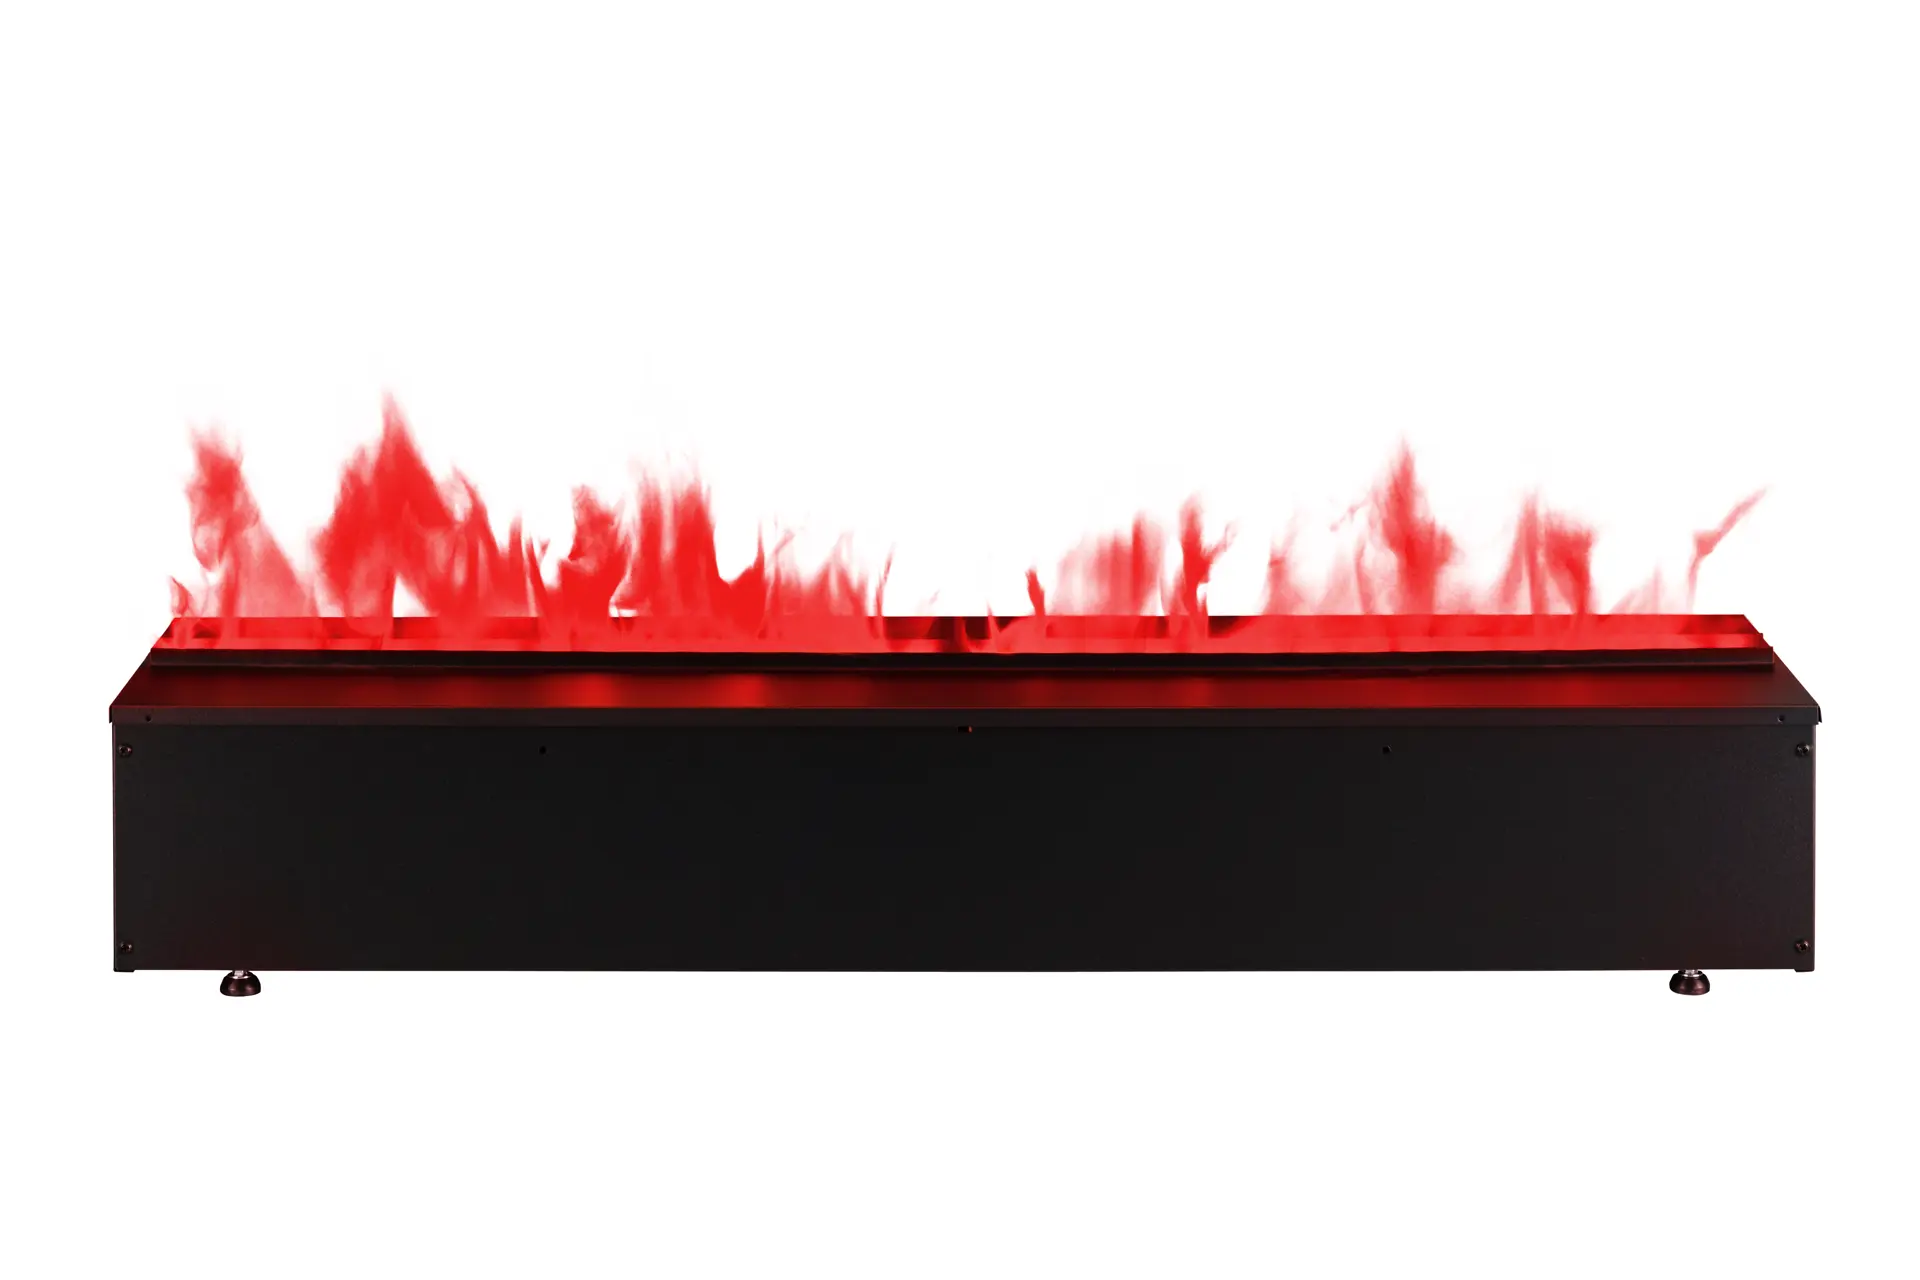 01_Dimplex_Cassette 1000_400001277_Front Red Flame.jpg